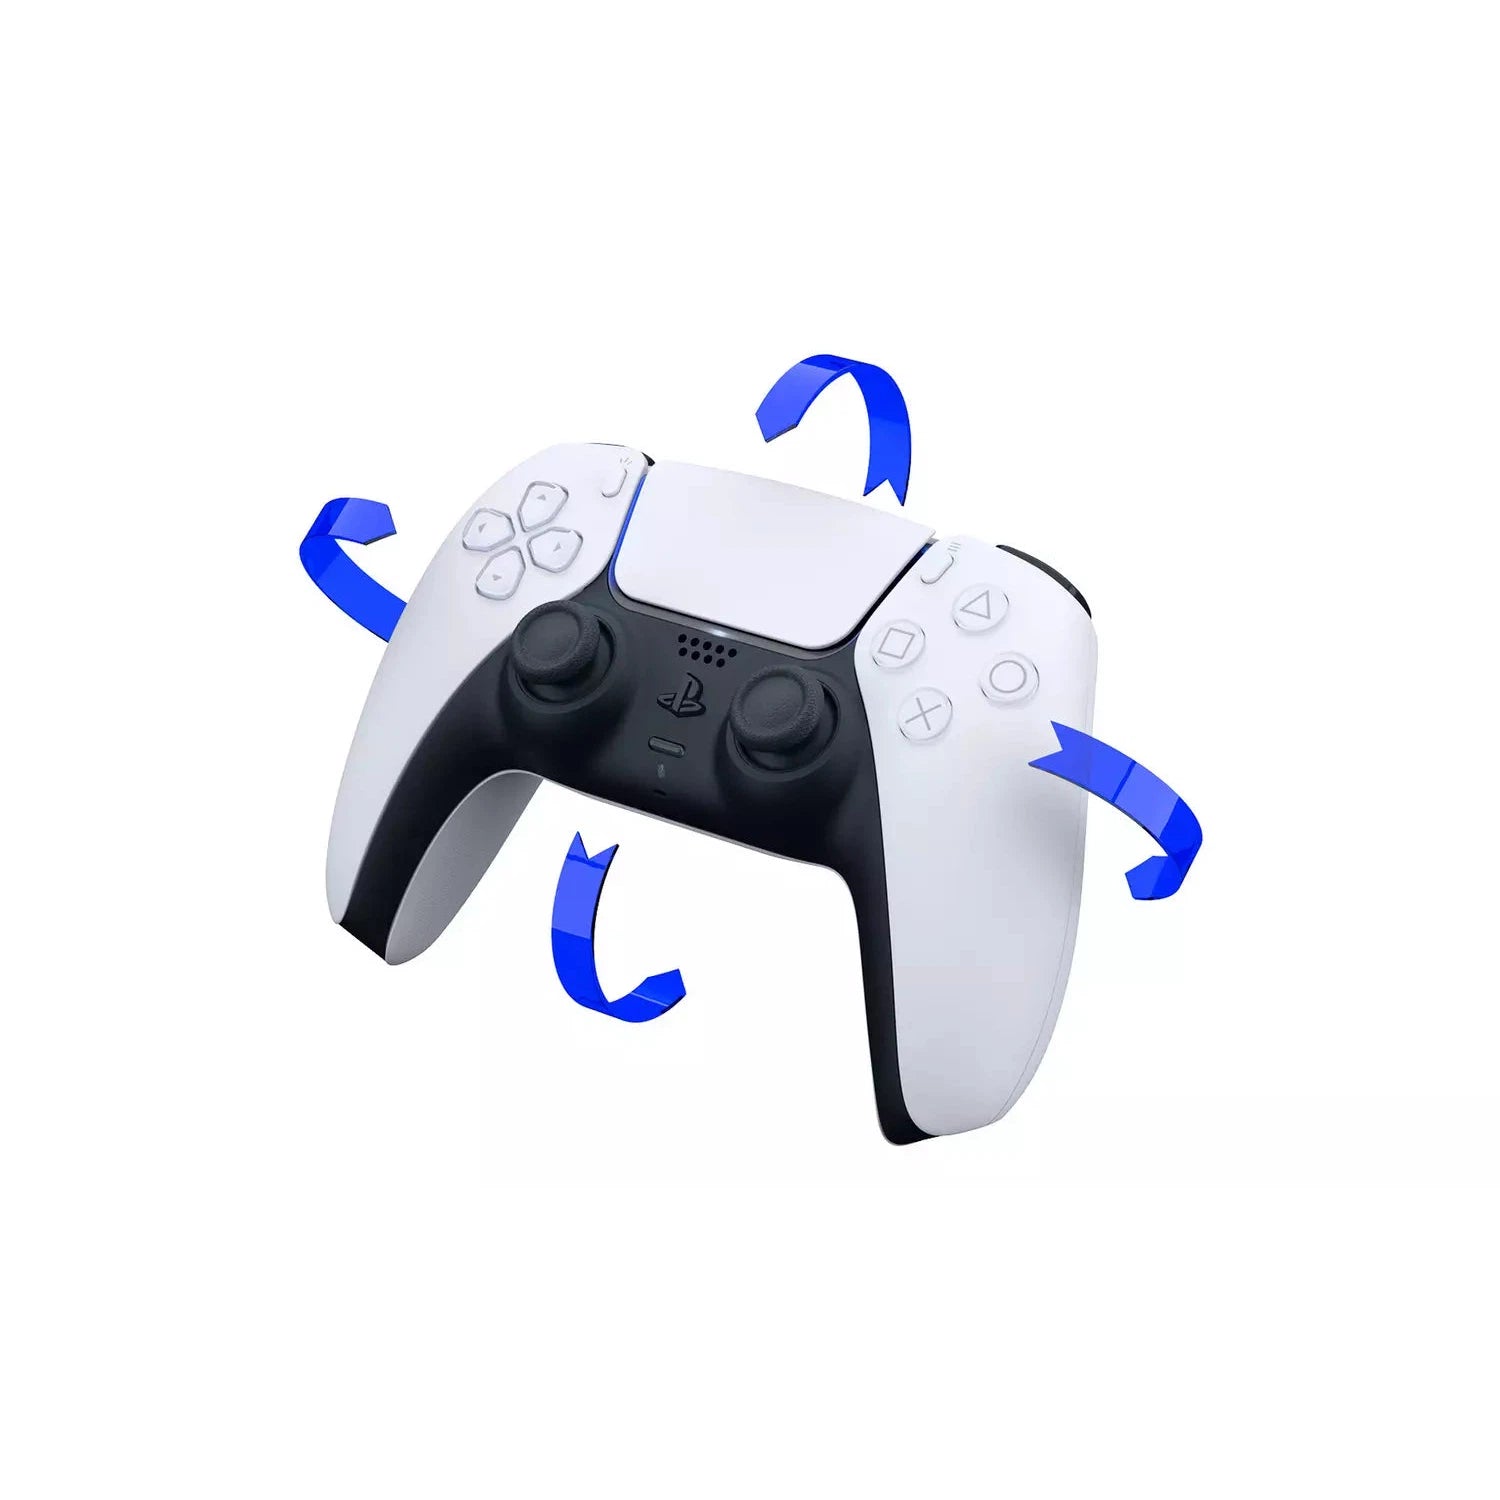 Sony PS5 DualSense Wireless Controller - White - Refurbished Excellent